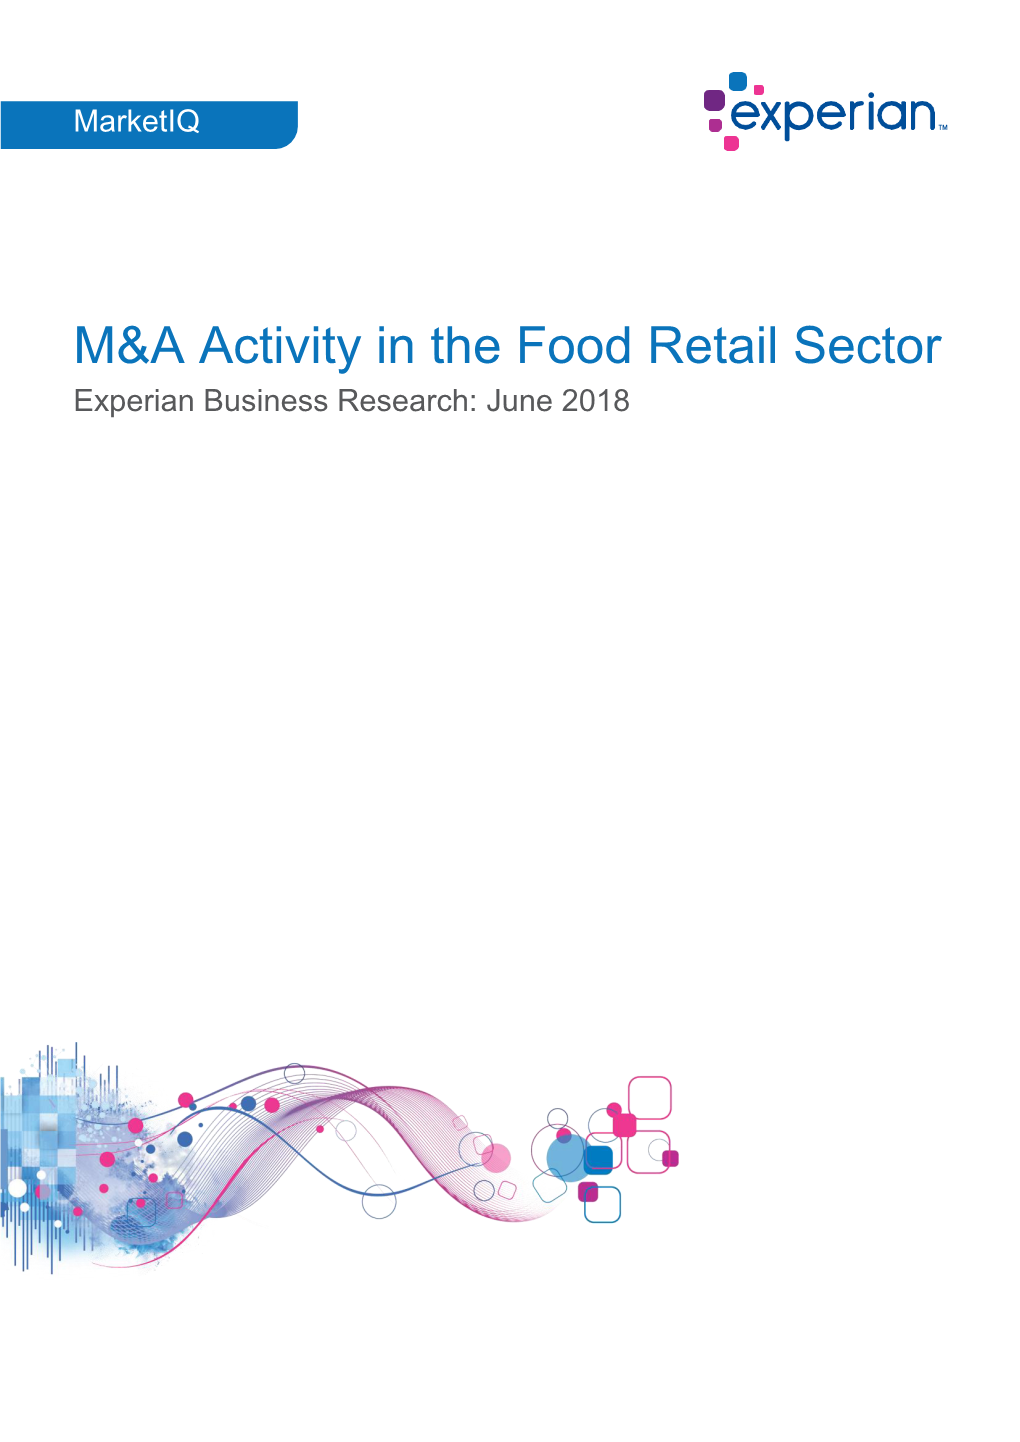 M&A Activity in the Food Retail Sector